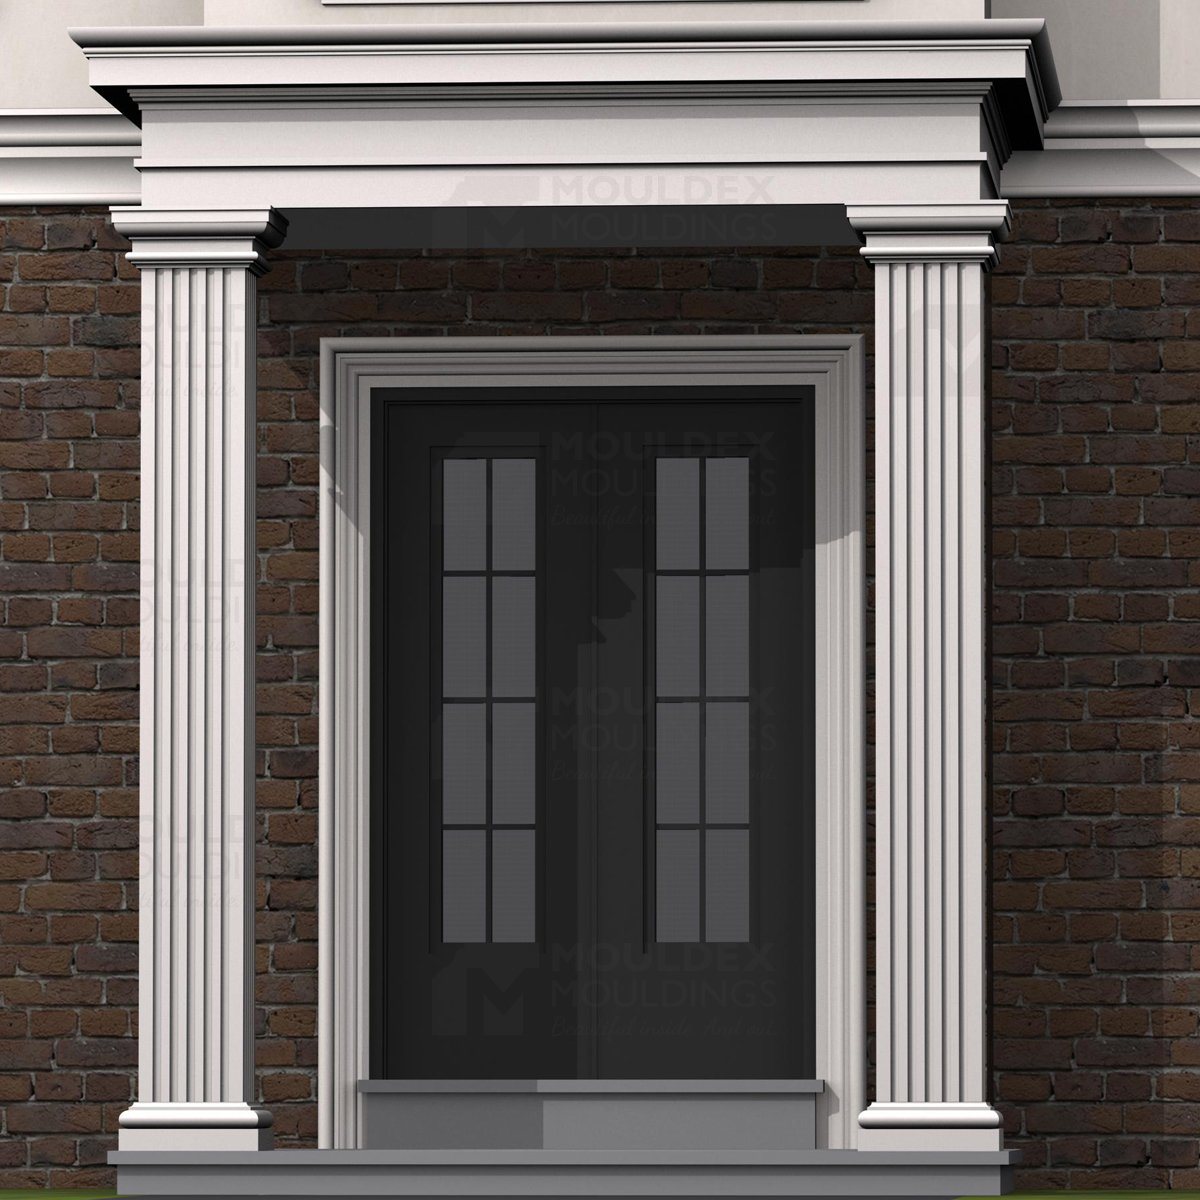 Exterior Square Column And Pilaster Exterior Moulding Design Example